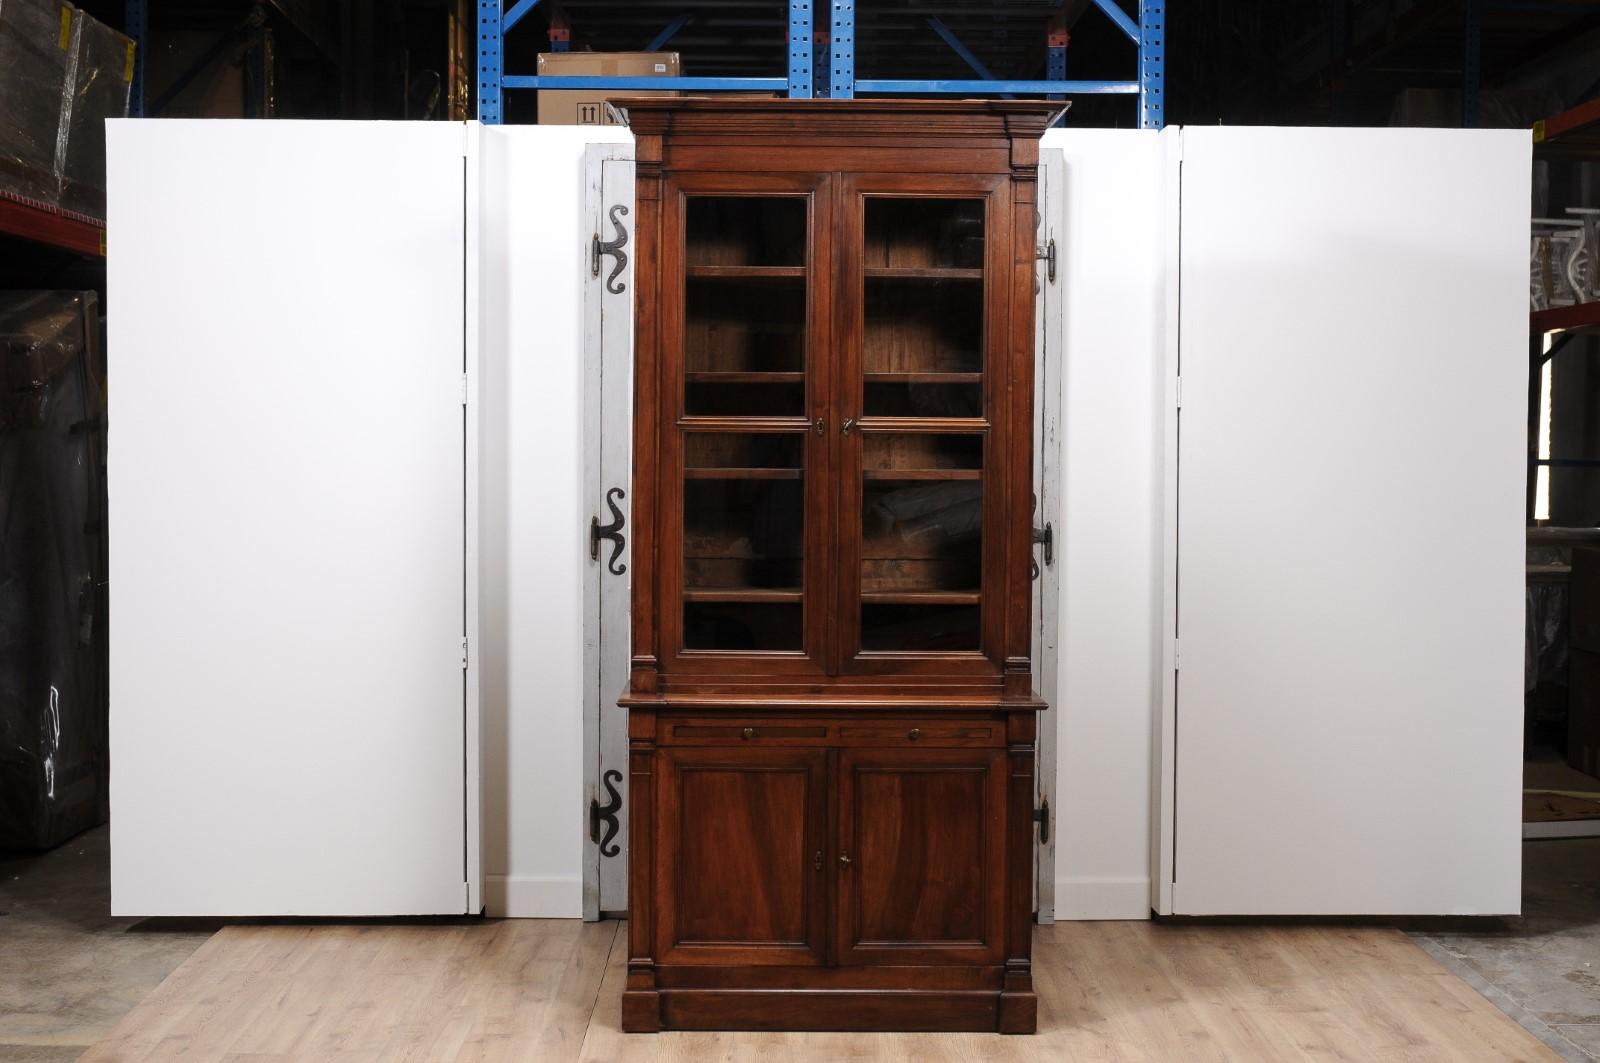 Louis XVI Style 1890s French Bookcase with Glass Doors and Pull Out Drawers For Sale 1